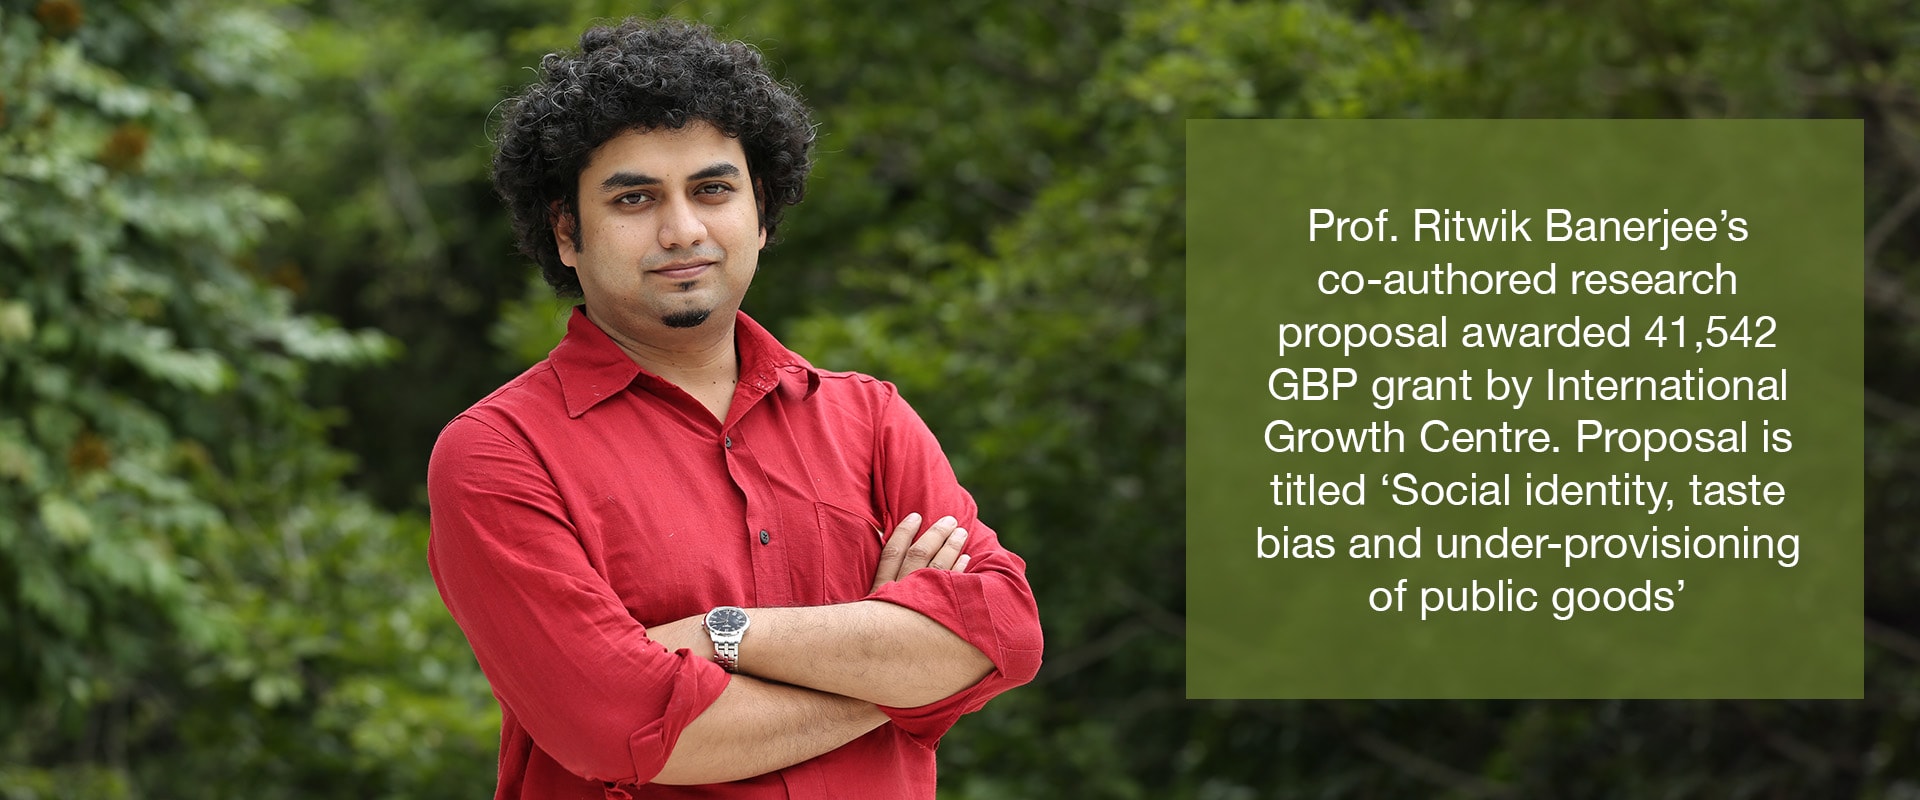 Prof. Ritwik Banerjee’s co-authored research proposal awarded